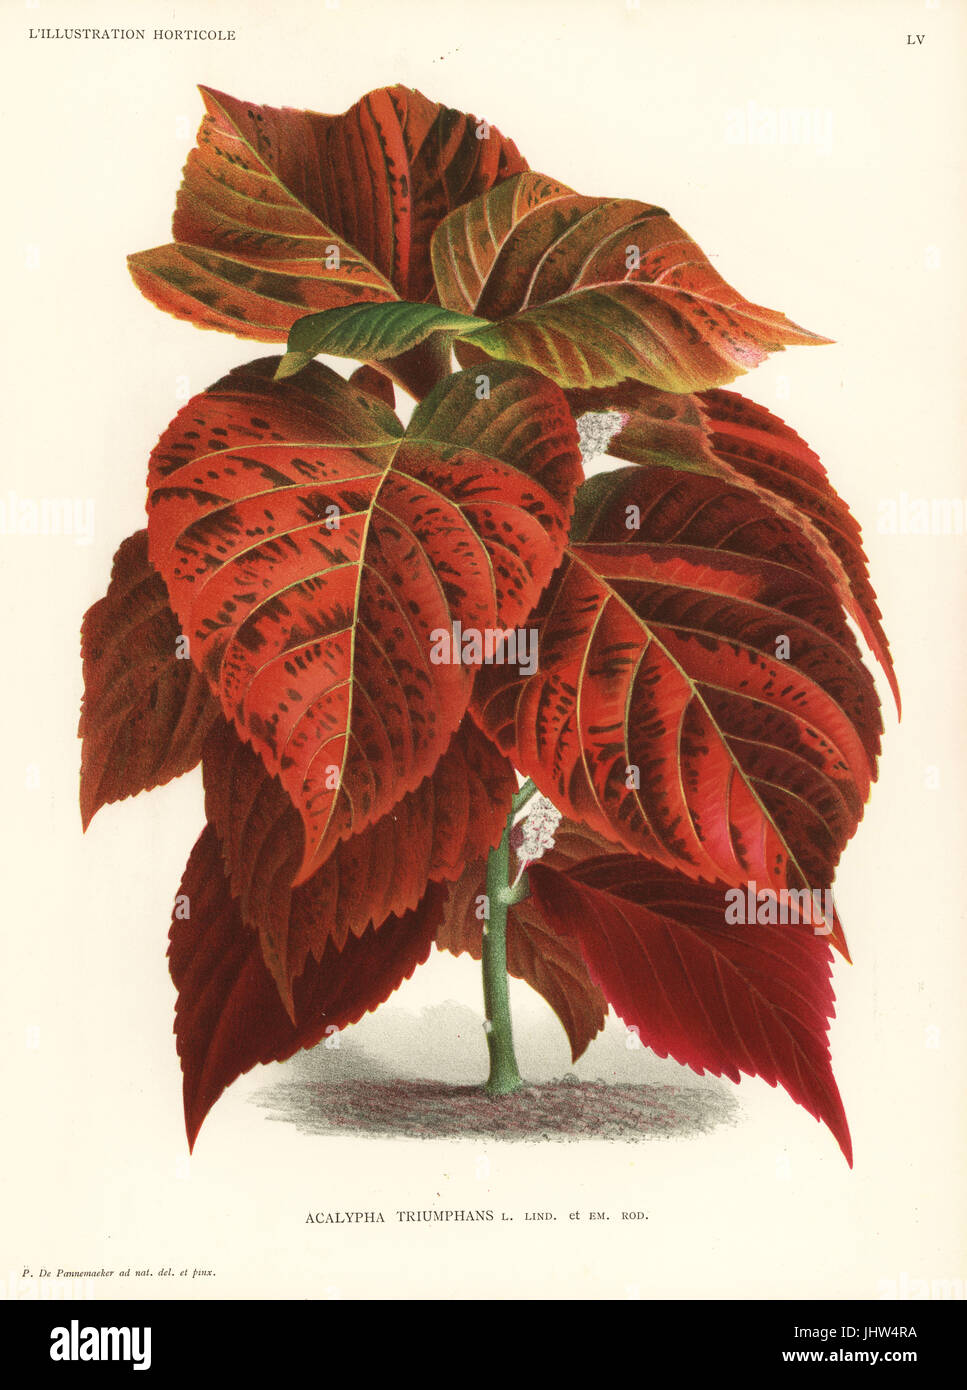 Acalypha wilkesiana foliage plant (Acalypha triumphans). Drawn and chromolithographed by Pieter de Pannemaeker from Jean Linden's l'Illustration Horticole, Brussels, 1888. Stock Photo